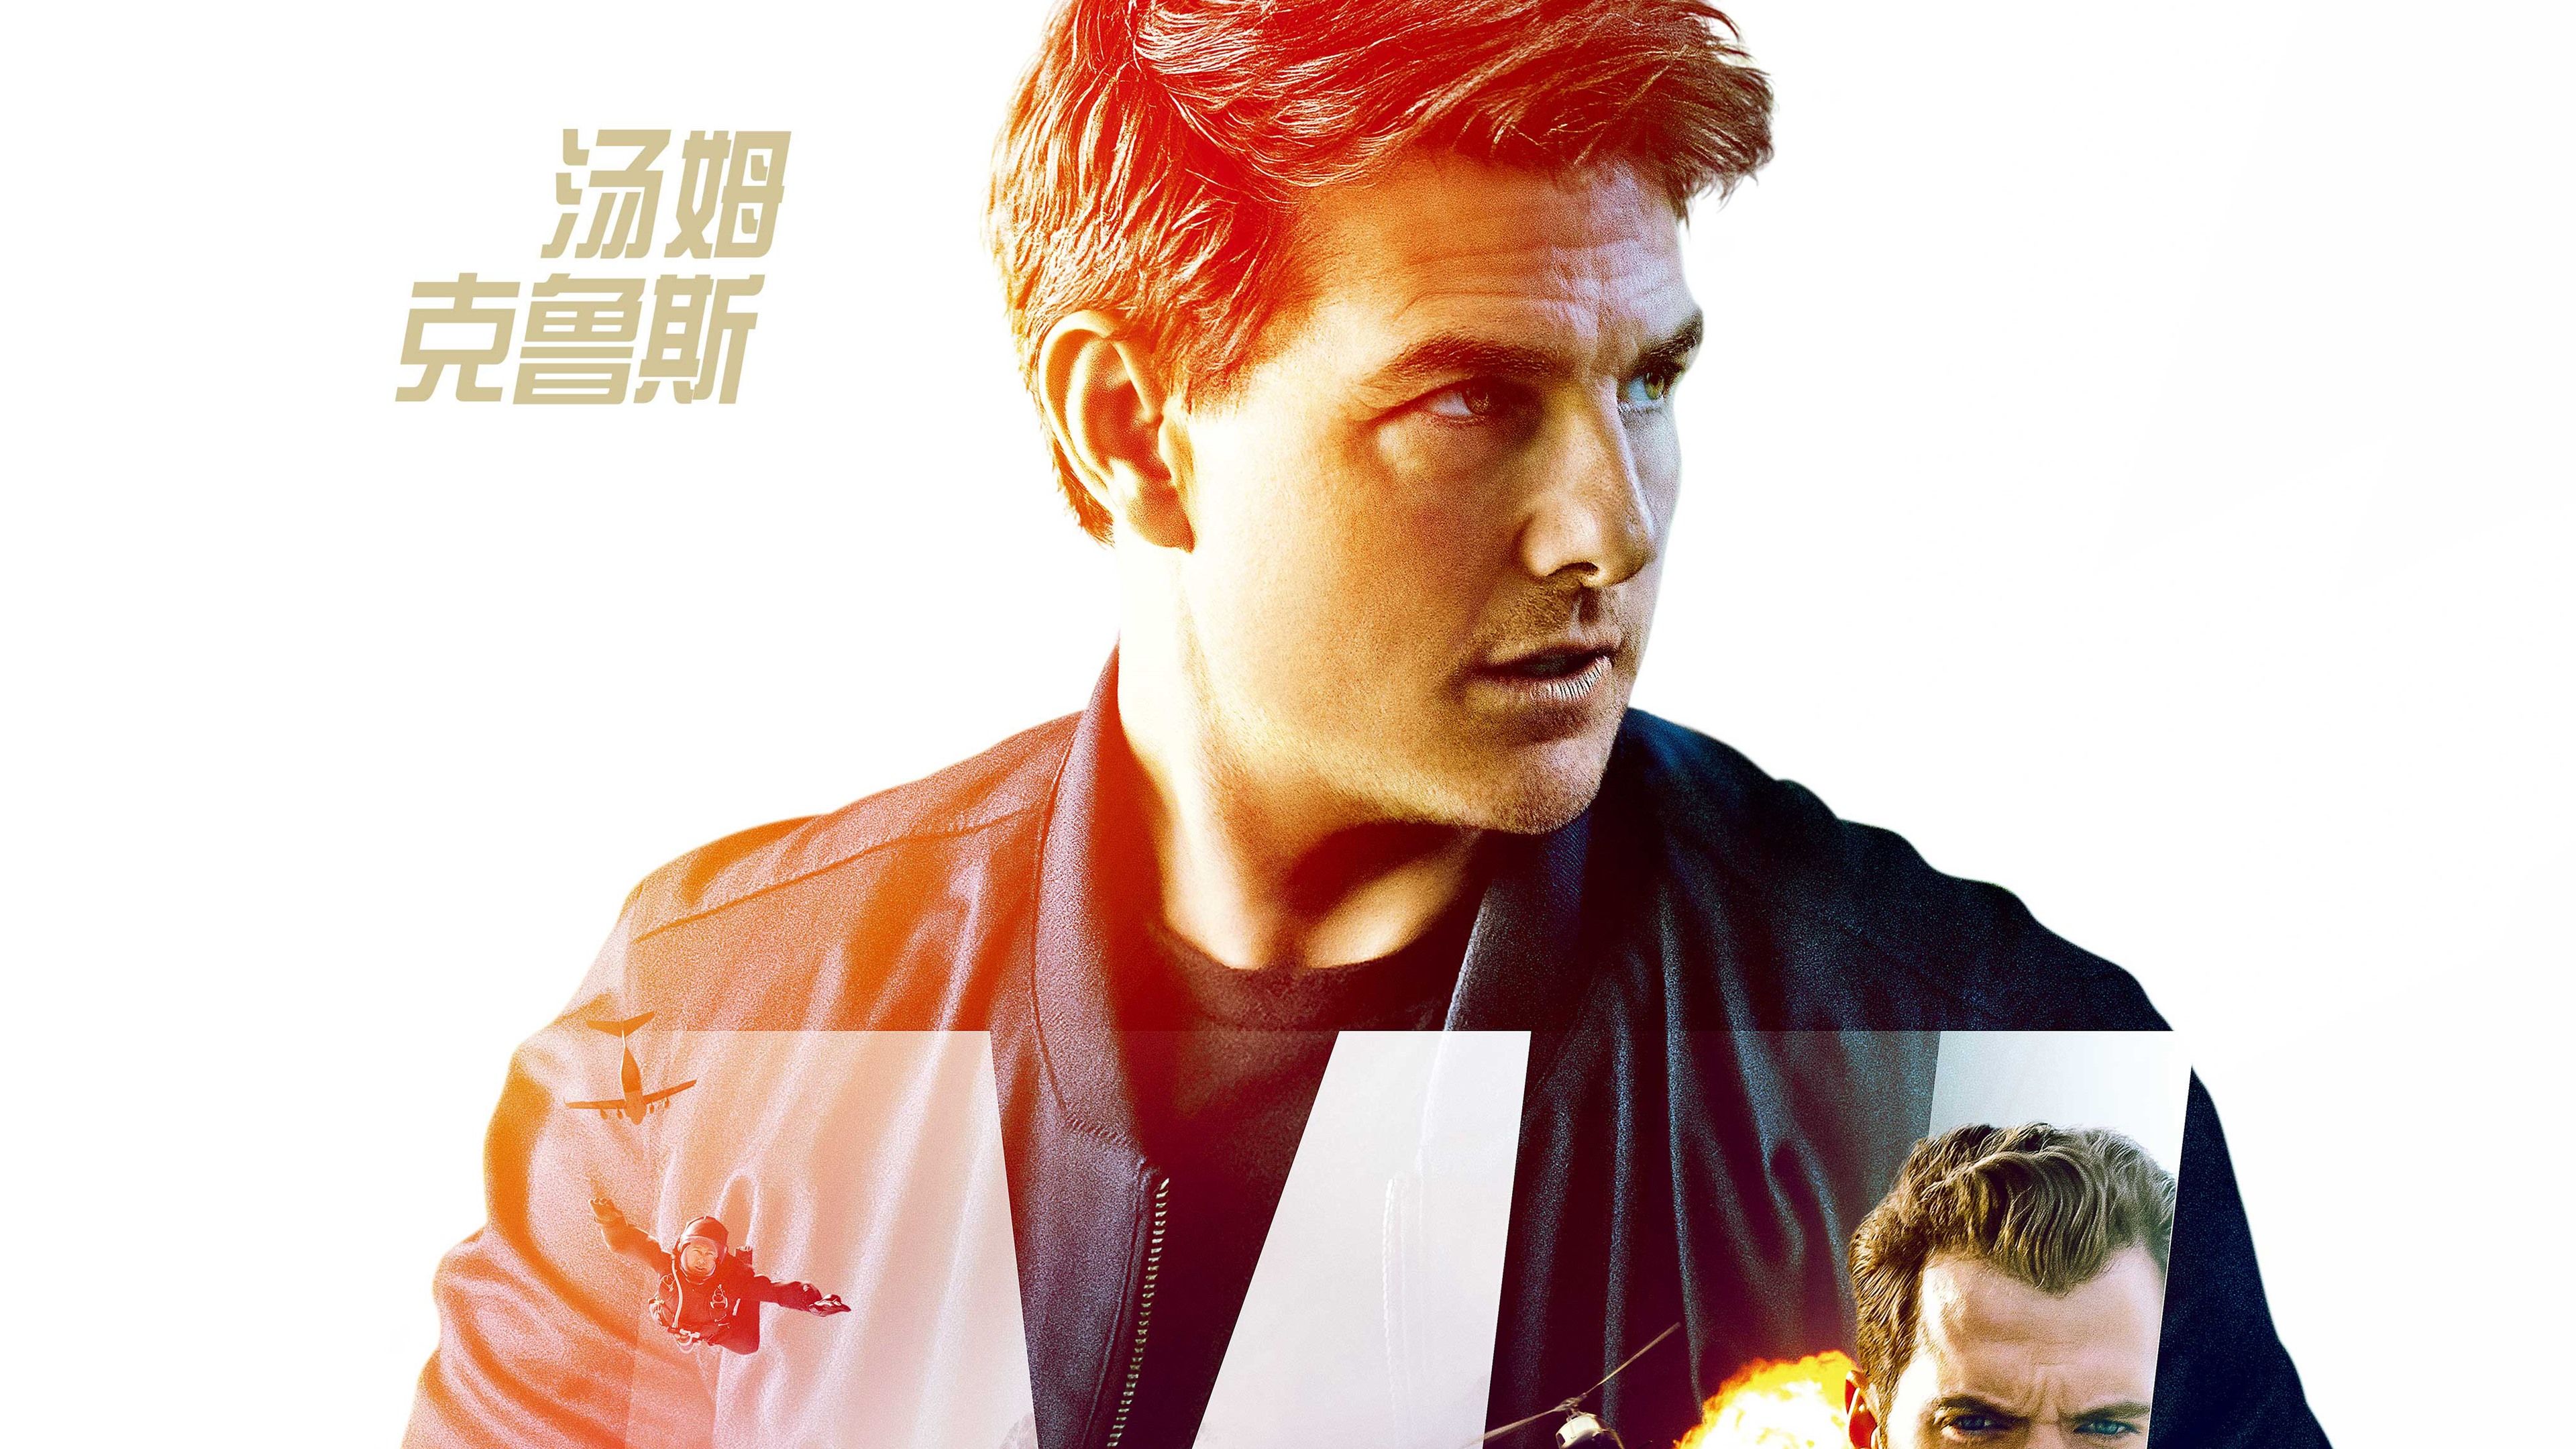 Wallpaper Mission: Impossible, Fallout 3840x2160 UHD 4K Picture, Image